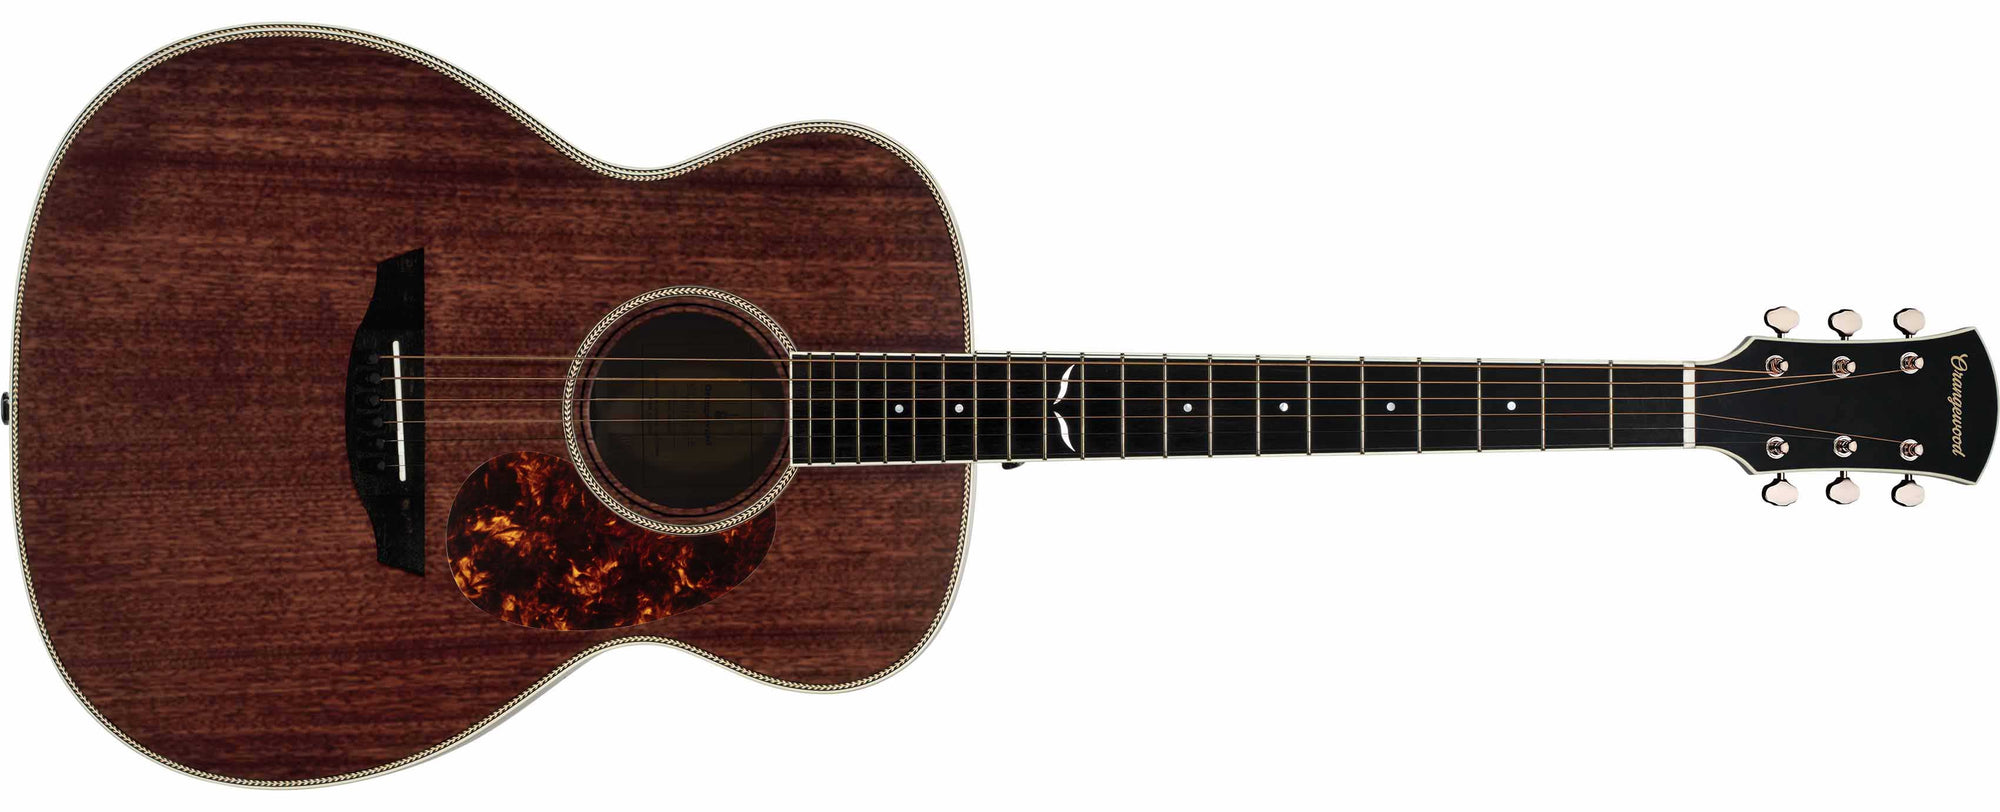 Mahogany grand concert acoustic guitar with ebony fretboard, mother of pearl fretboard inlays, and silver hardware